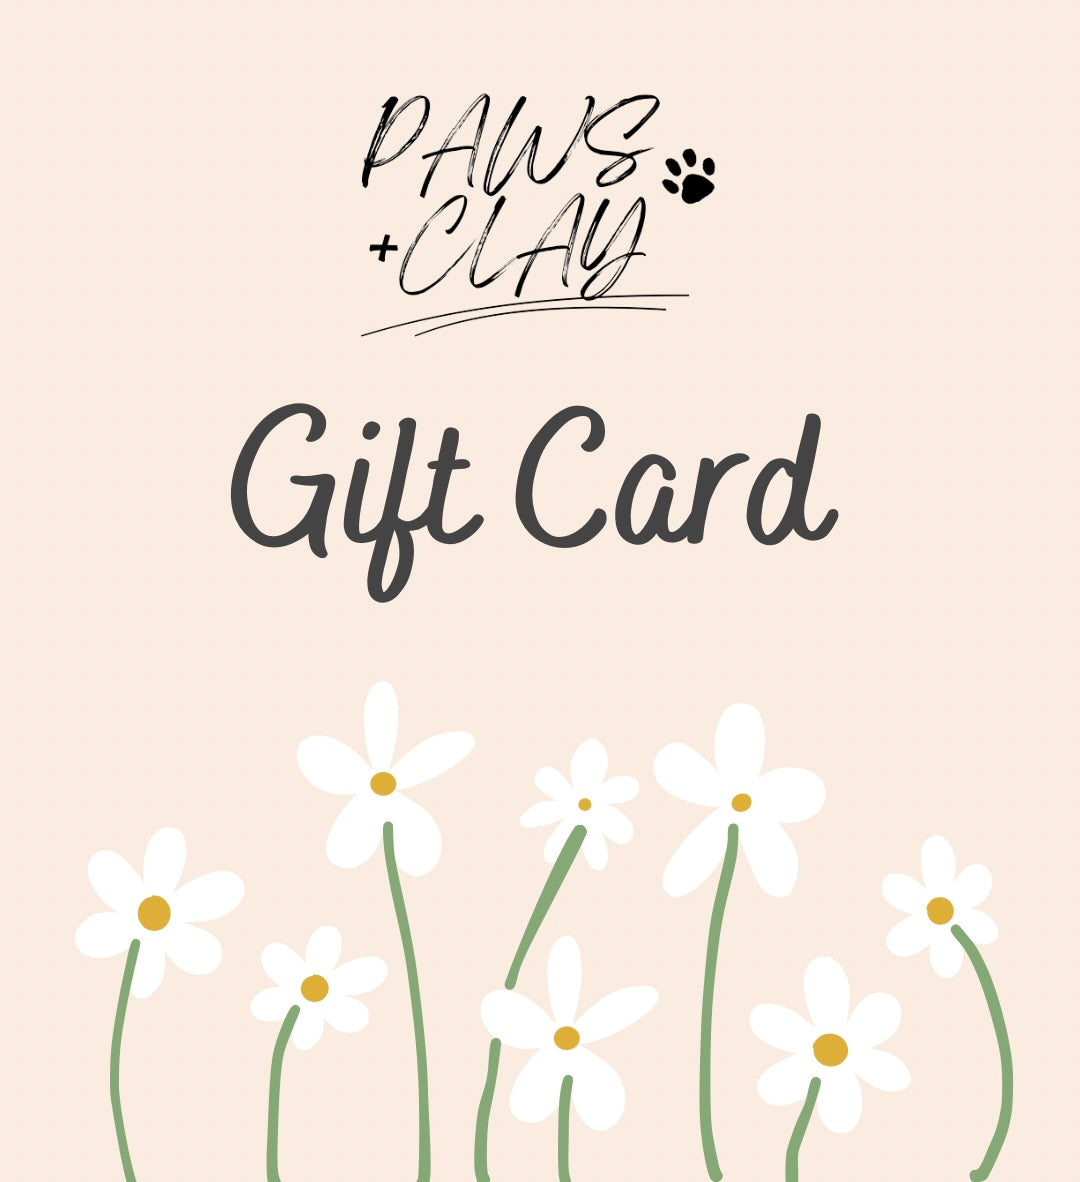 Paws + Clay Gift Card